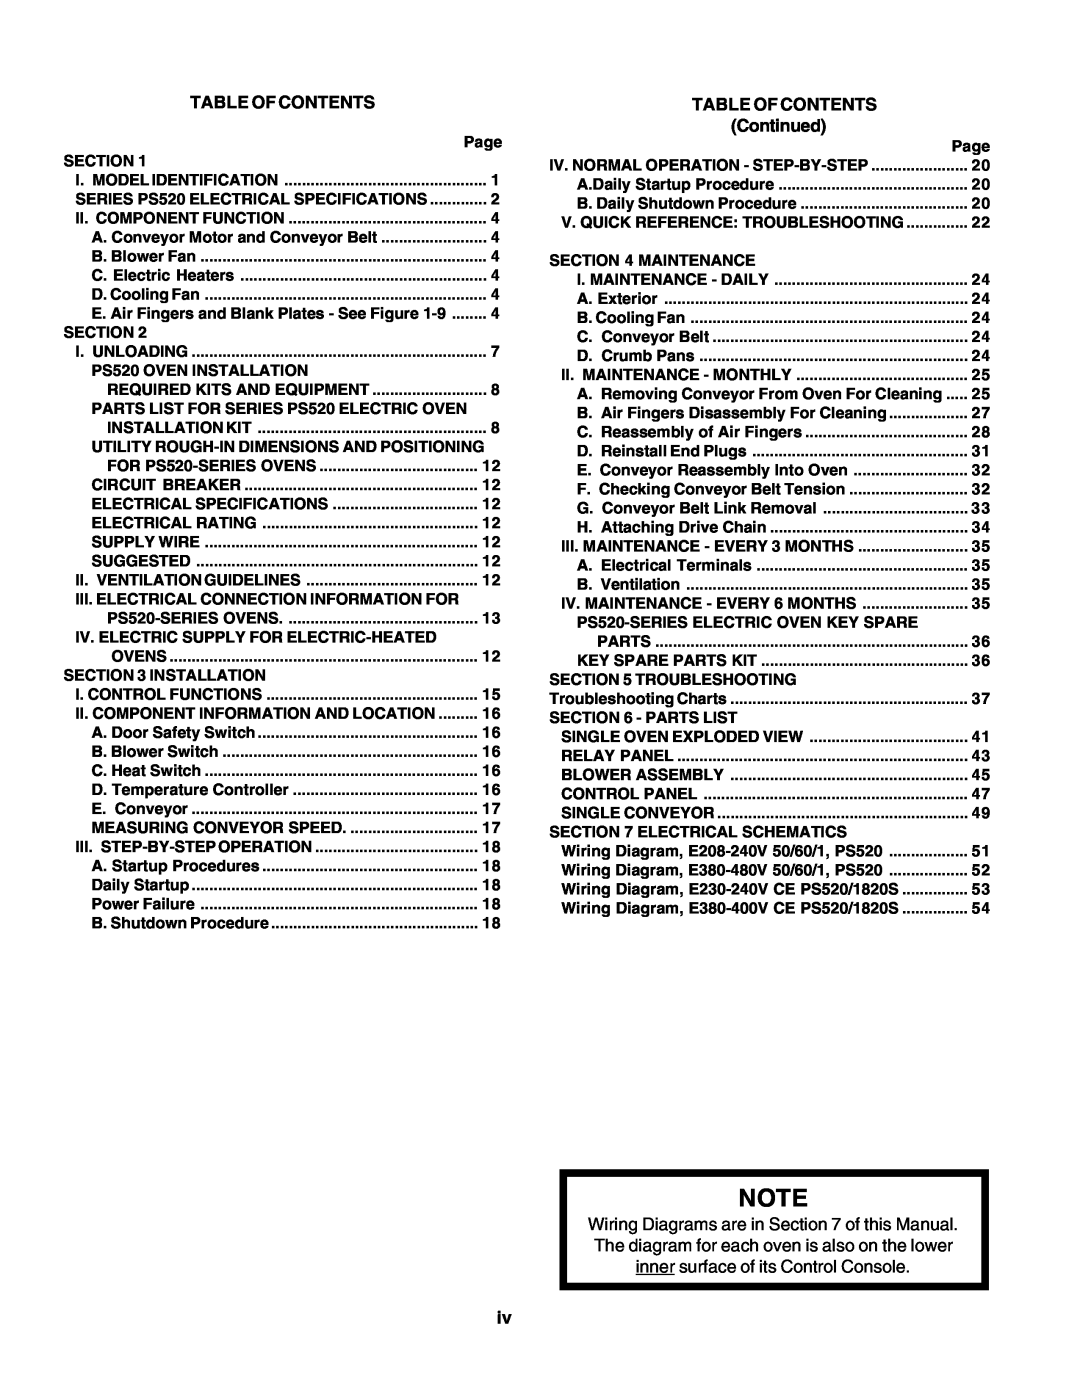 Middleby Marshall PS520 installation manual Table Of Contents, Continued 